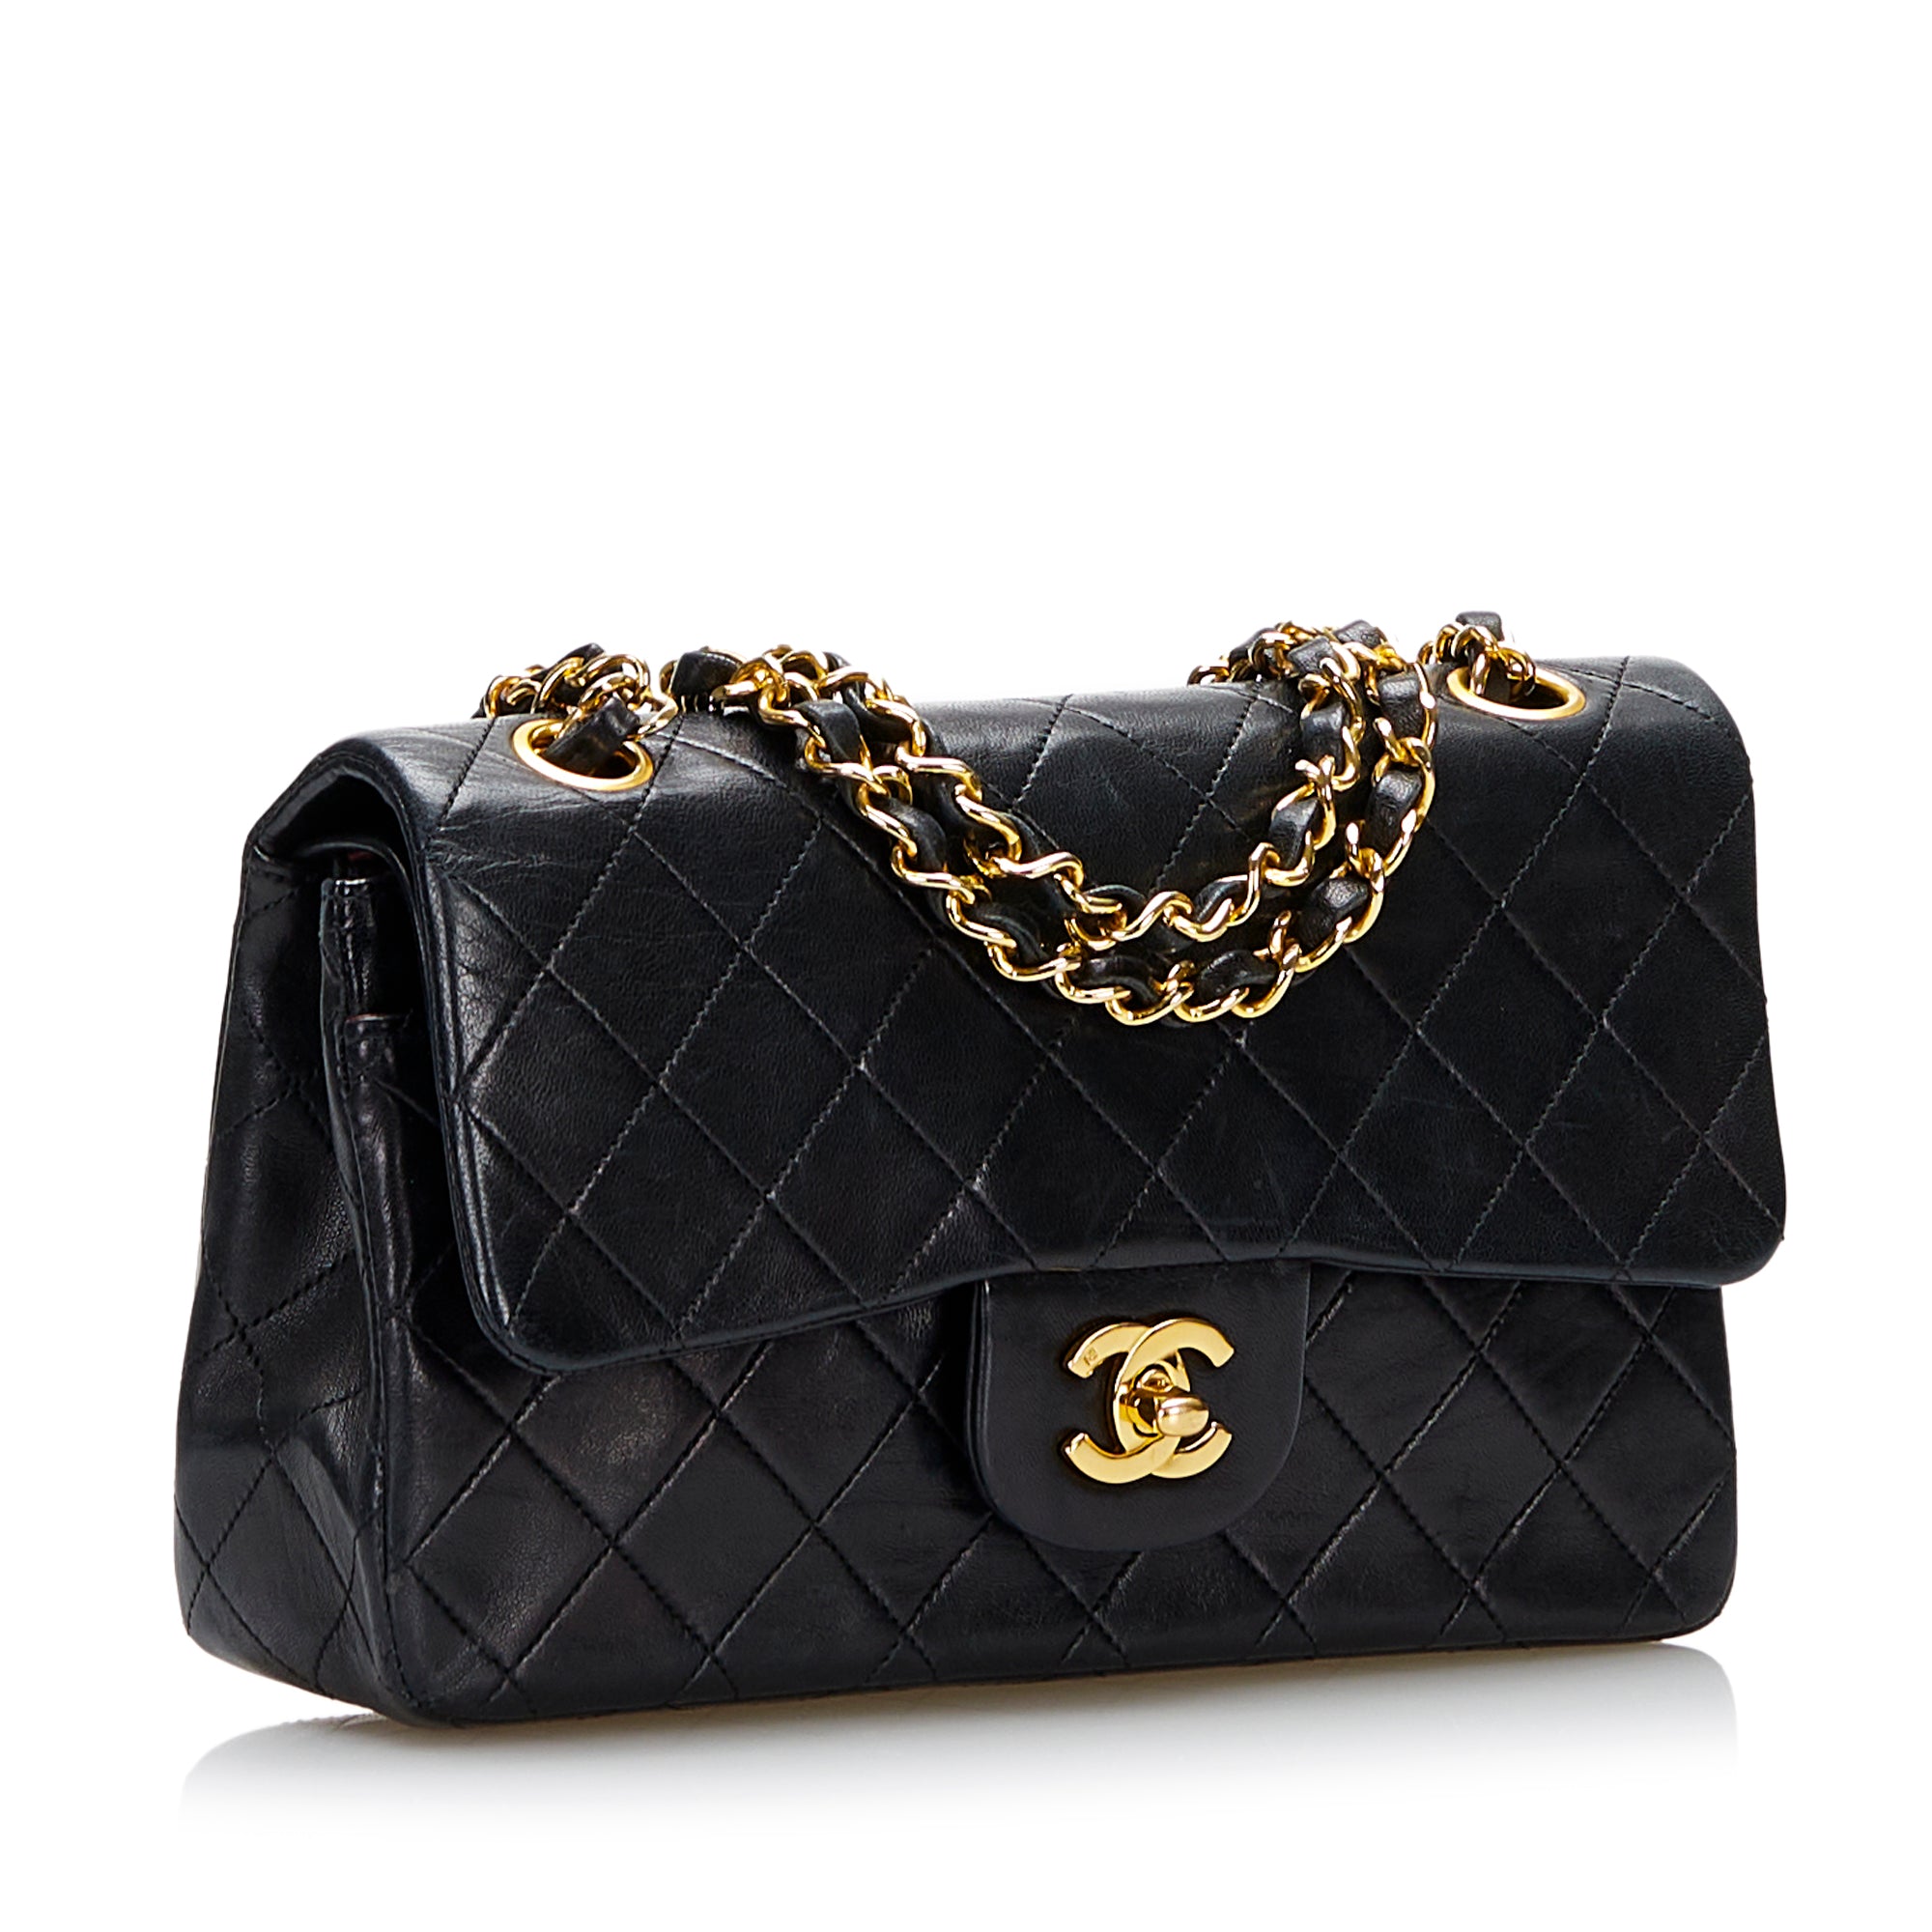 Black Chanel Small Classic Lambskin Double Flap Bag